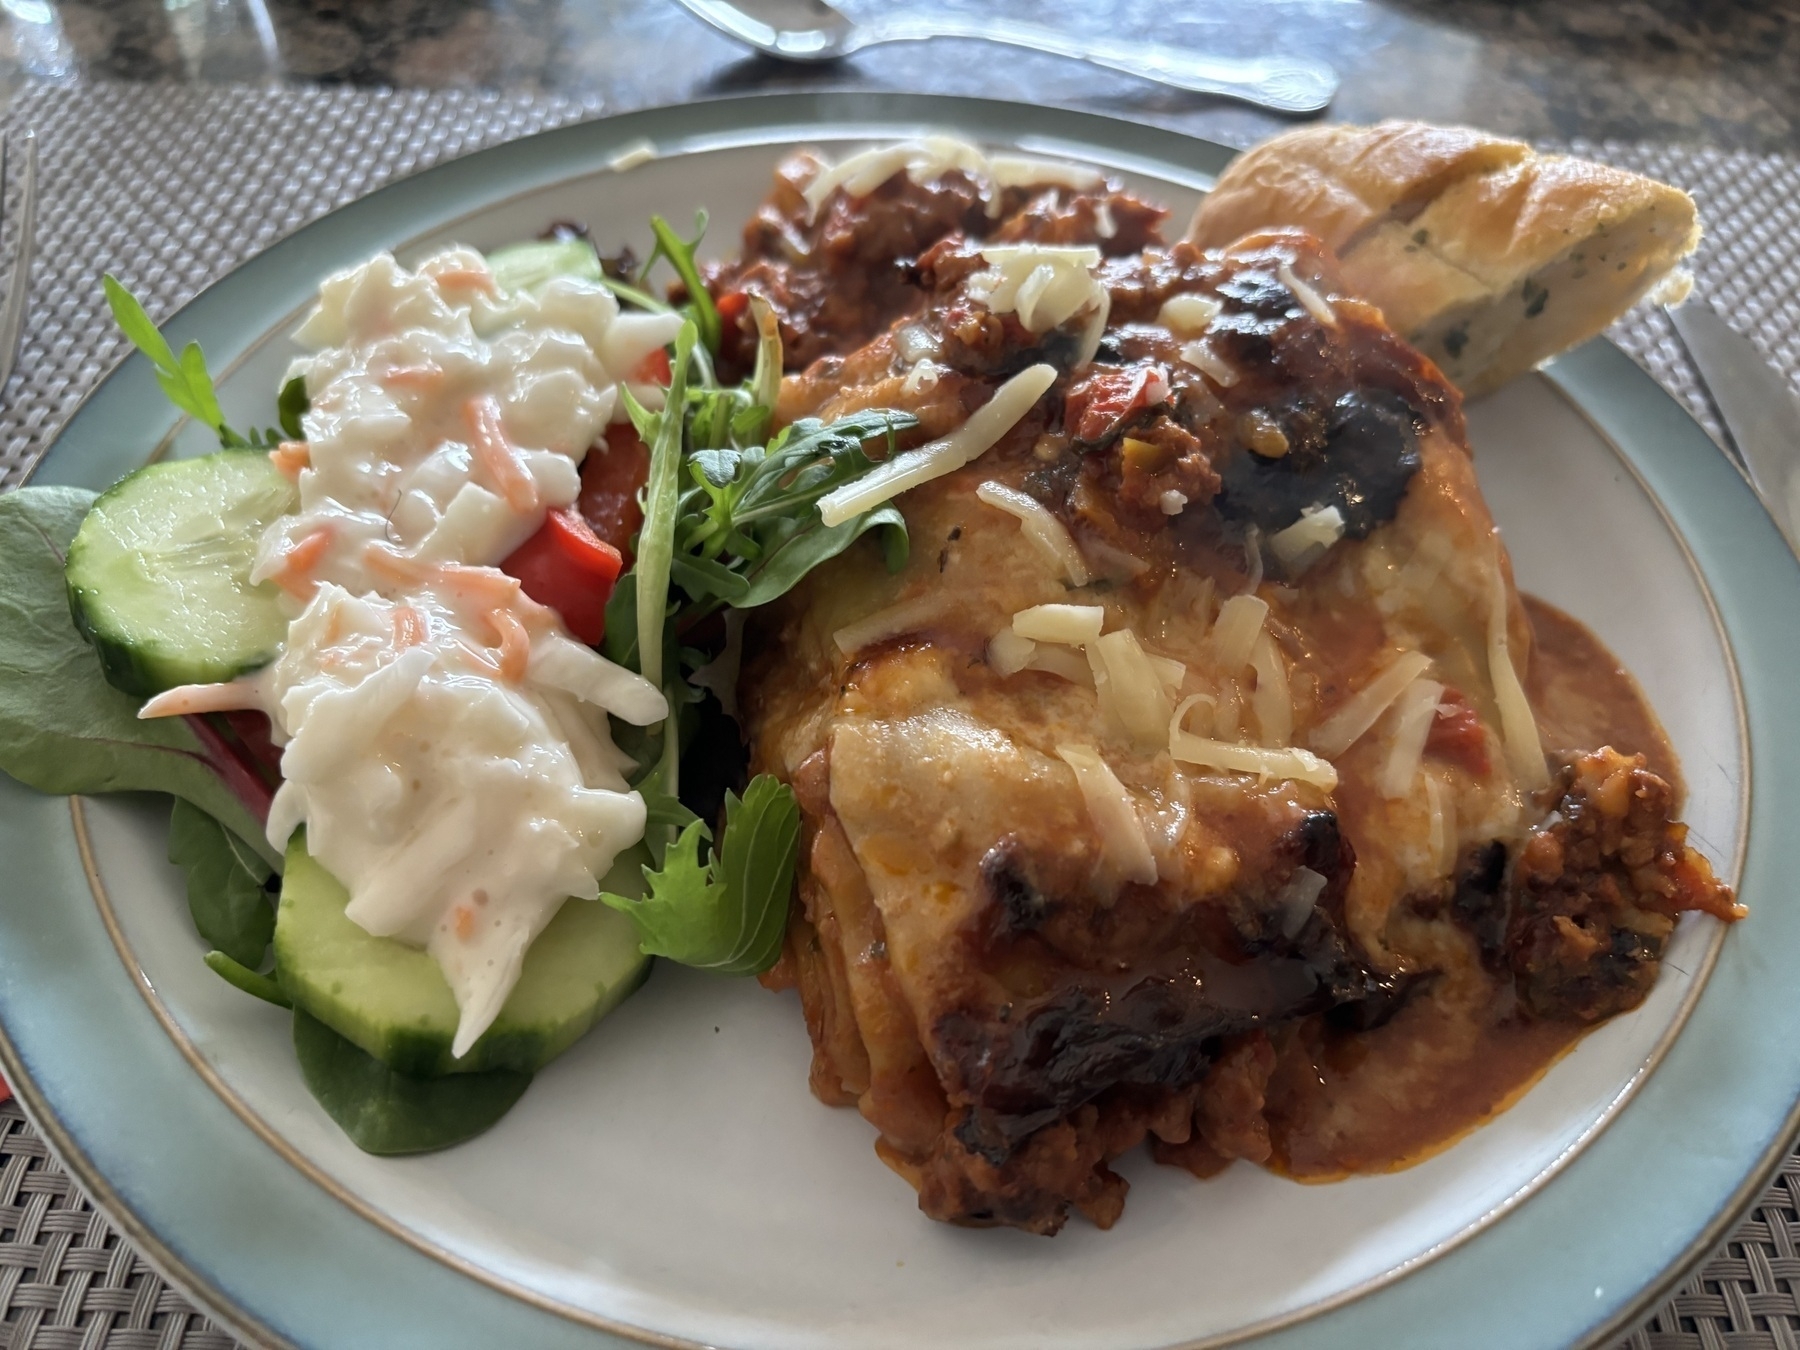 Lasagne and salad - the best!